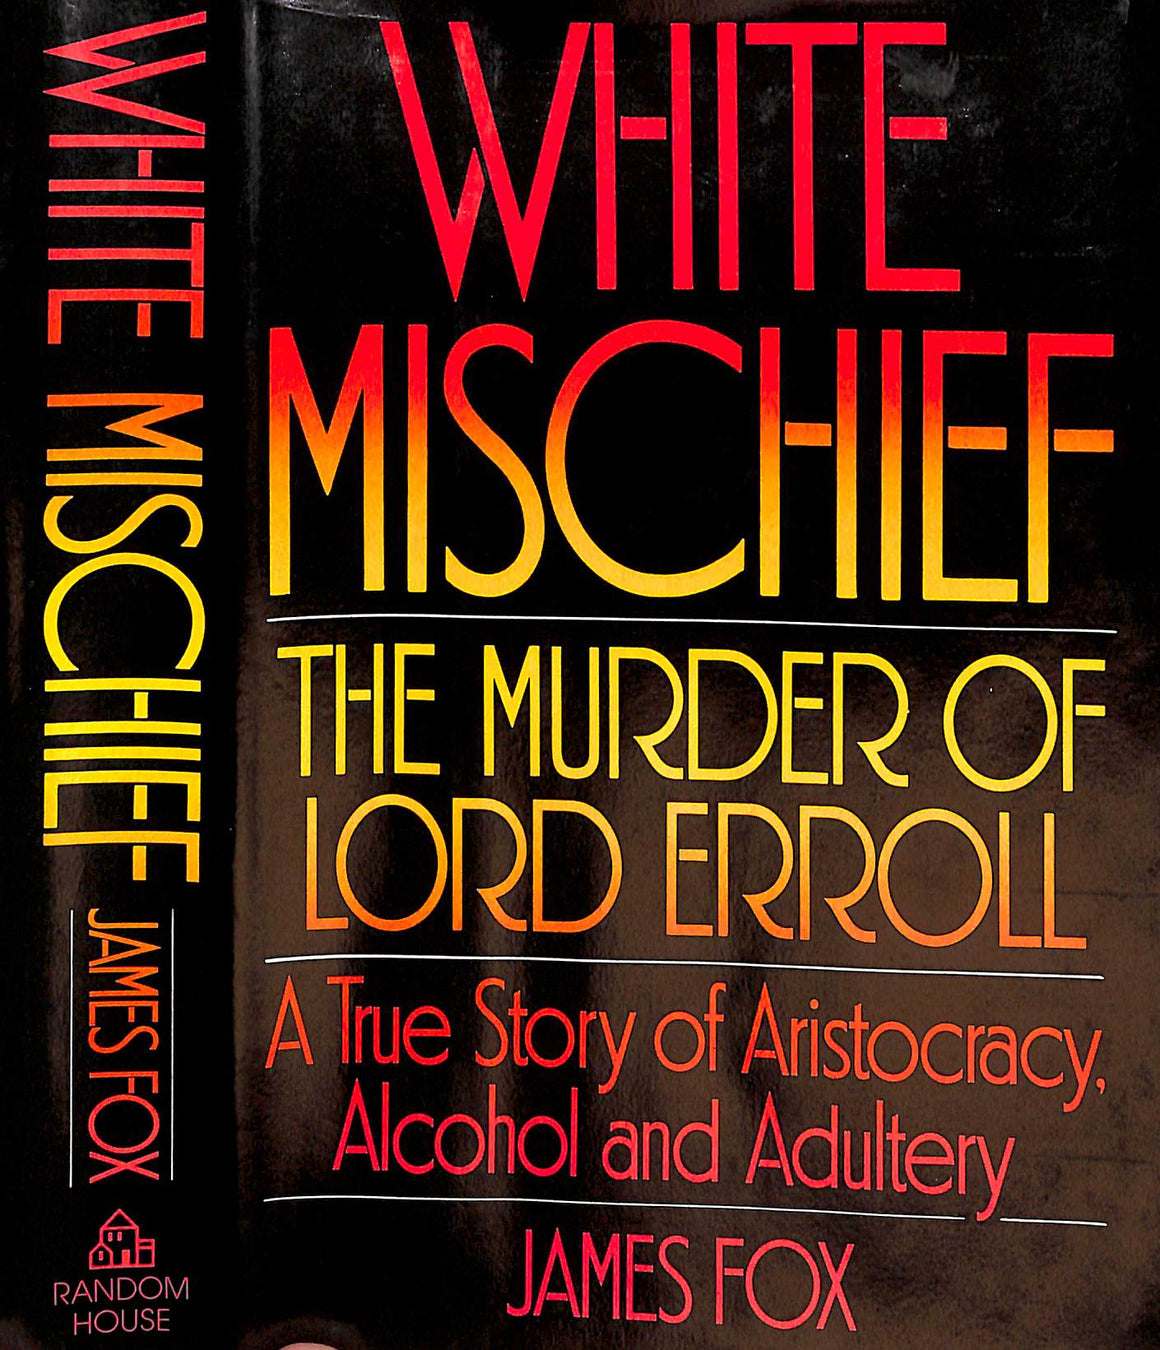 "White Mischief - The Murder Of Lord Erroll:  True Story Of Aristocracy, Alcohol And Adultery" 1982 FOX, James